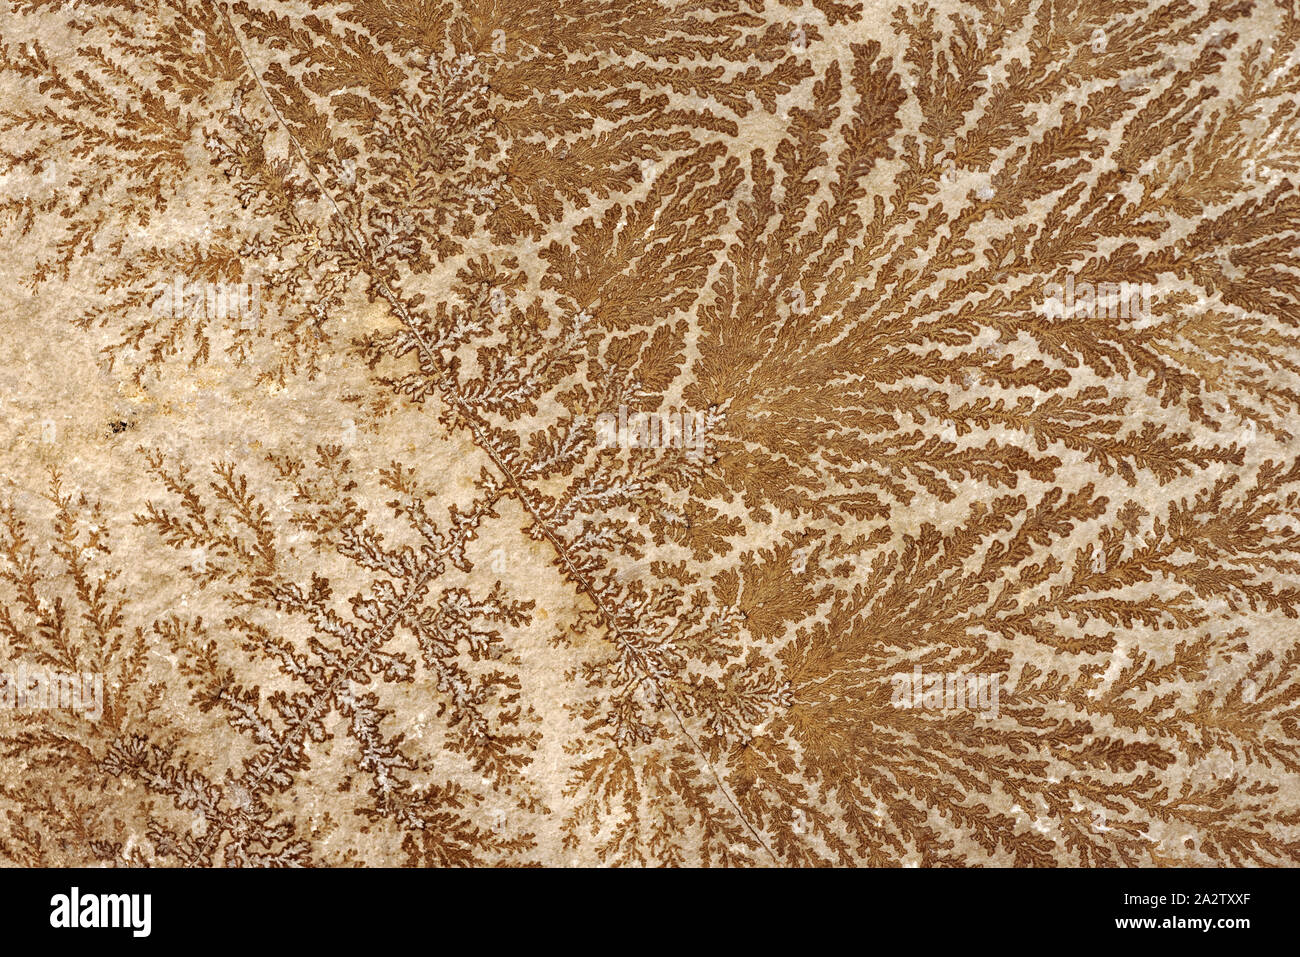 Backgrounds and textures: abstract fossilized tree-like pattern on a stone surface, natural background Stock Photo